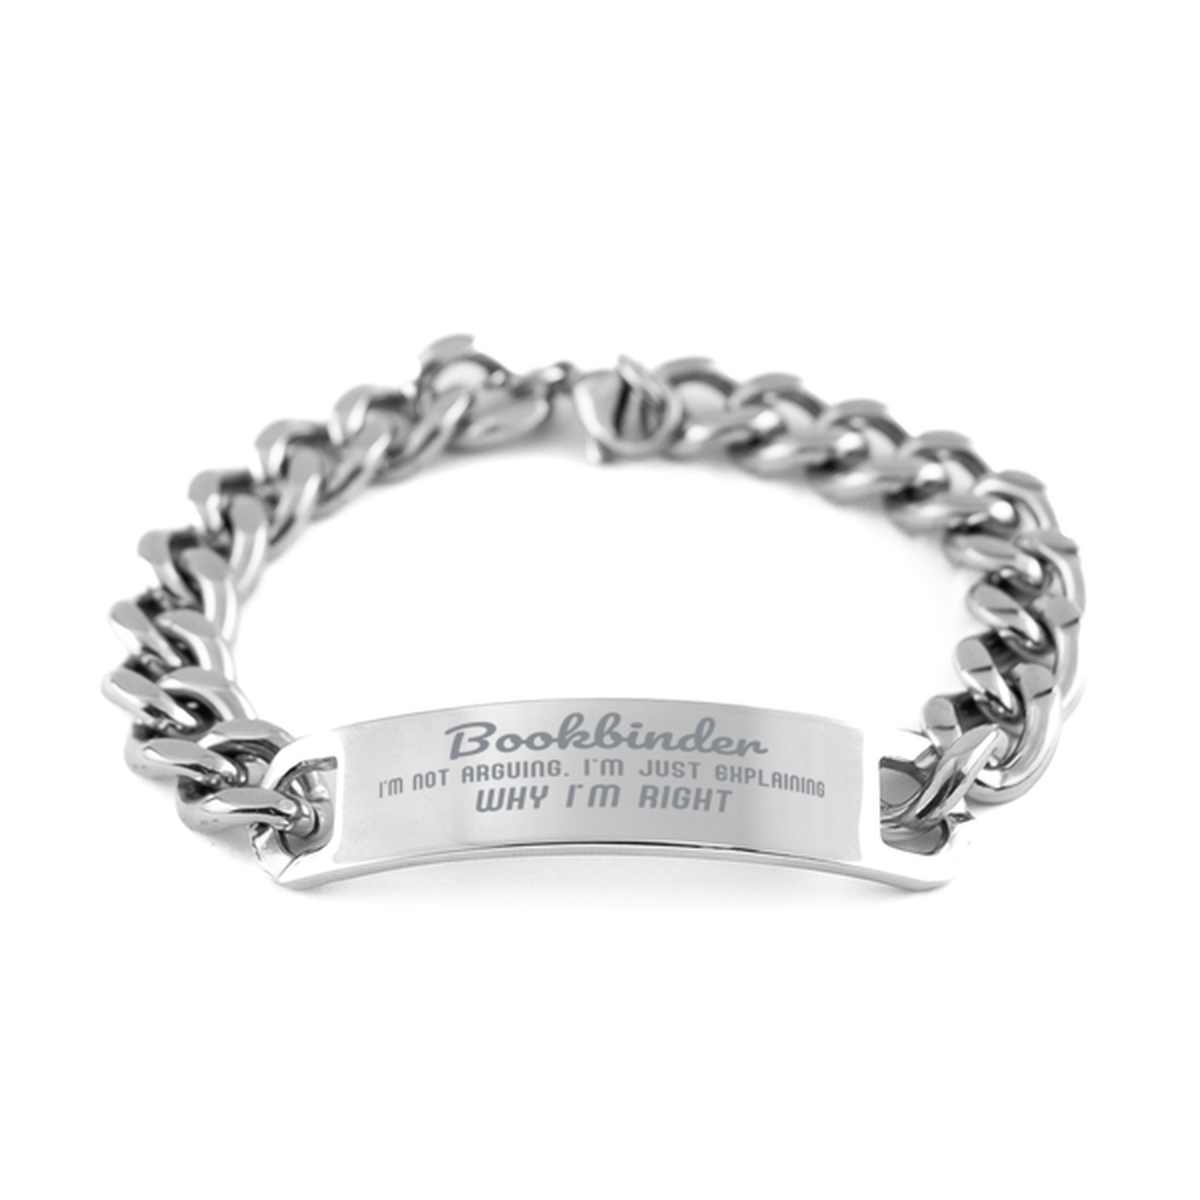 Bookbinder I'm not Arguing. I'm Just Explaining Why I'm RIGHT Cuban Chain Stainless Steel Bracelet, Graduation Birthday Christmas Bookbinder Gifts For Bookbinder Funny Saying Quote Present for Men Women Coworker